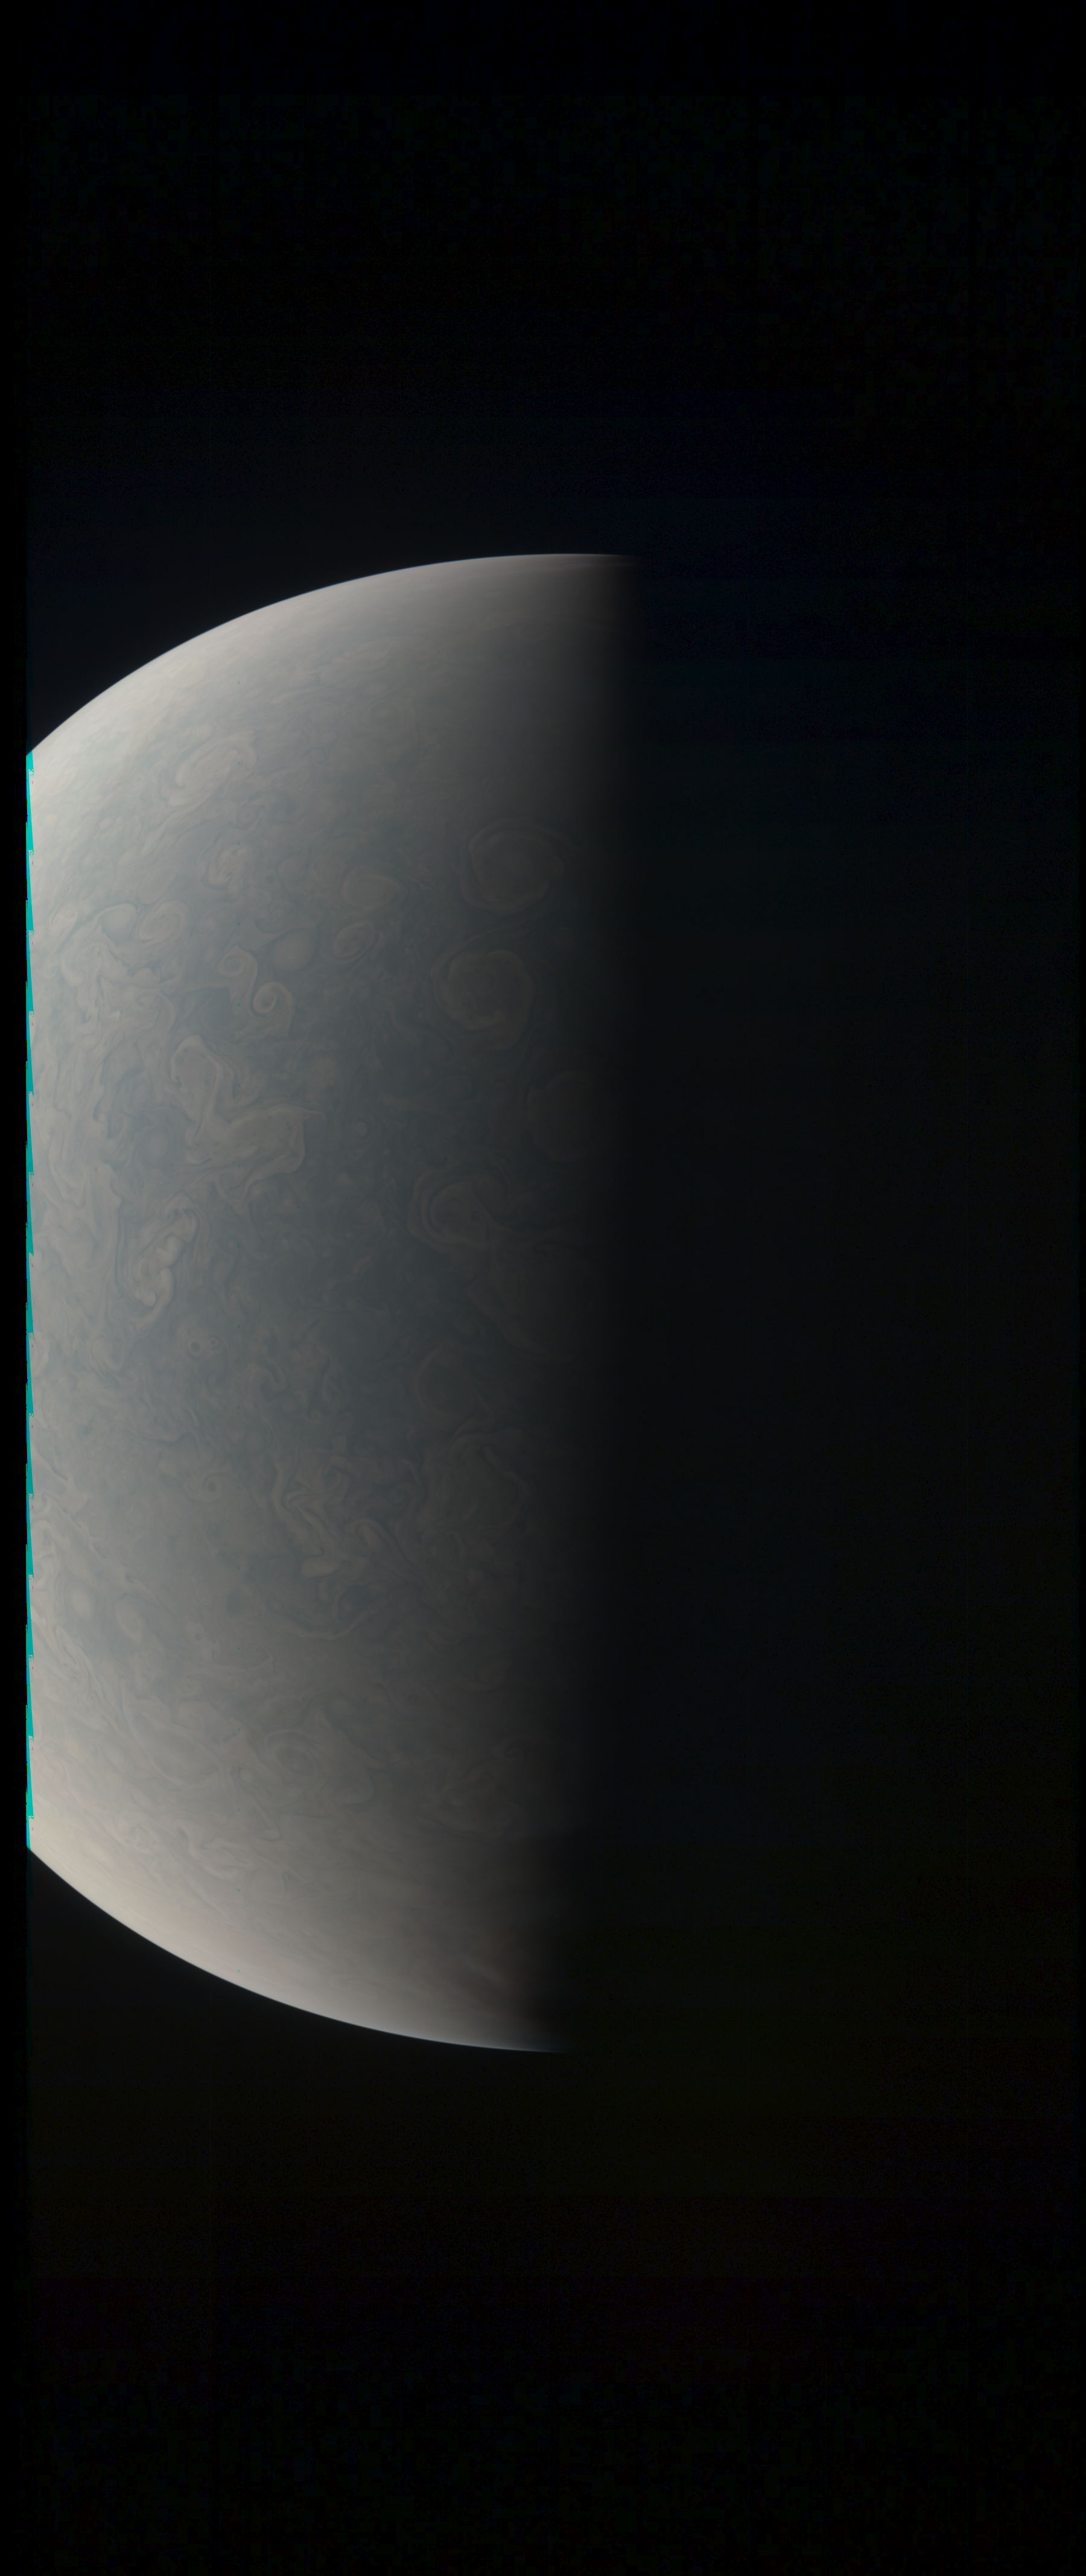 JNCE_2018355_17C00013_V01-raw_proc_hollow_sphere_c_pj_out.BMP_thumbnail_.png